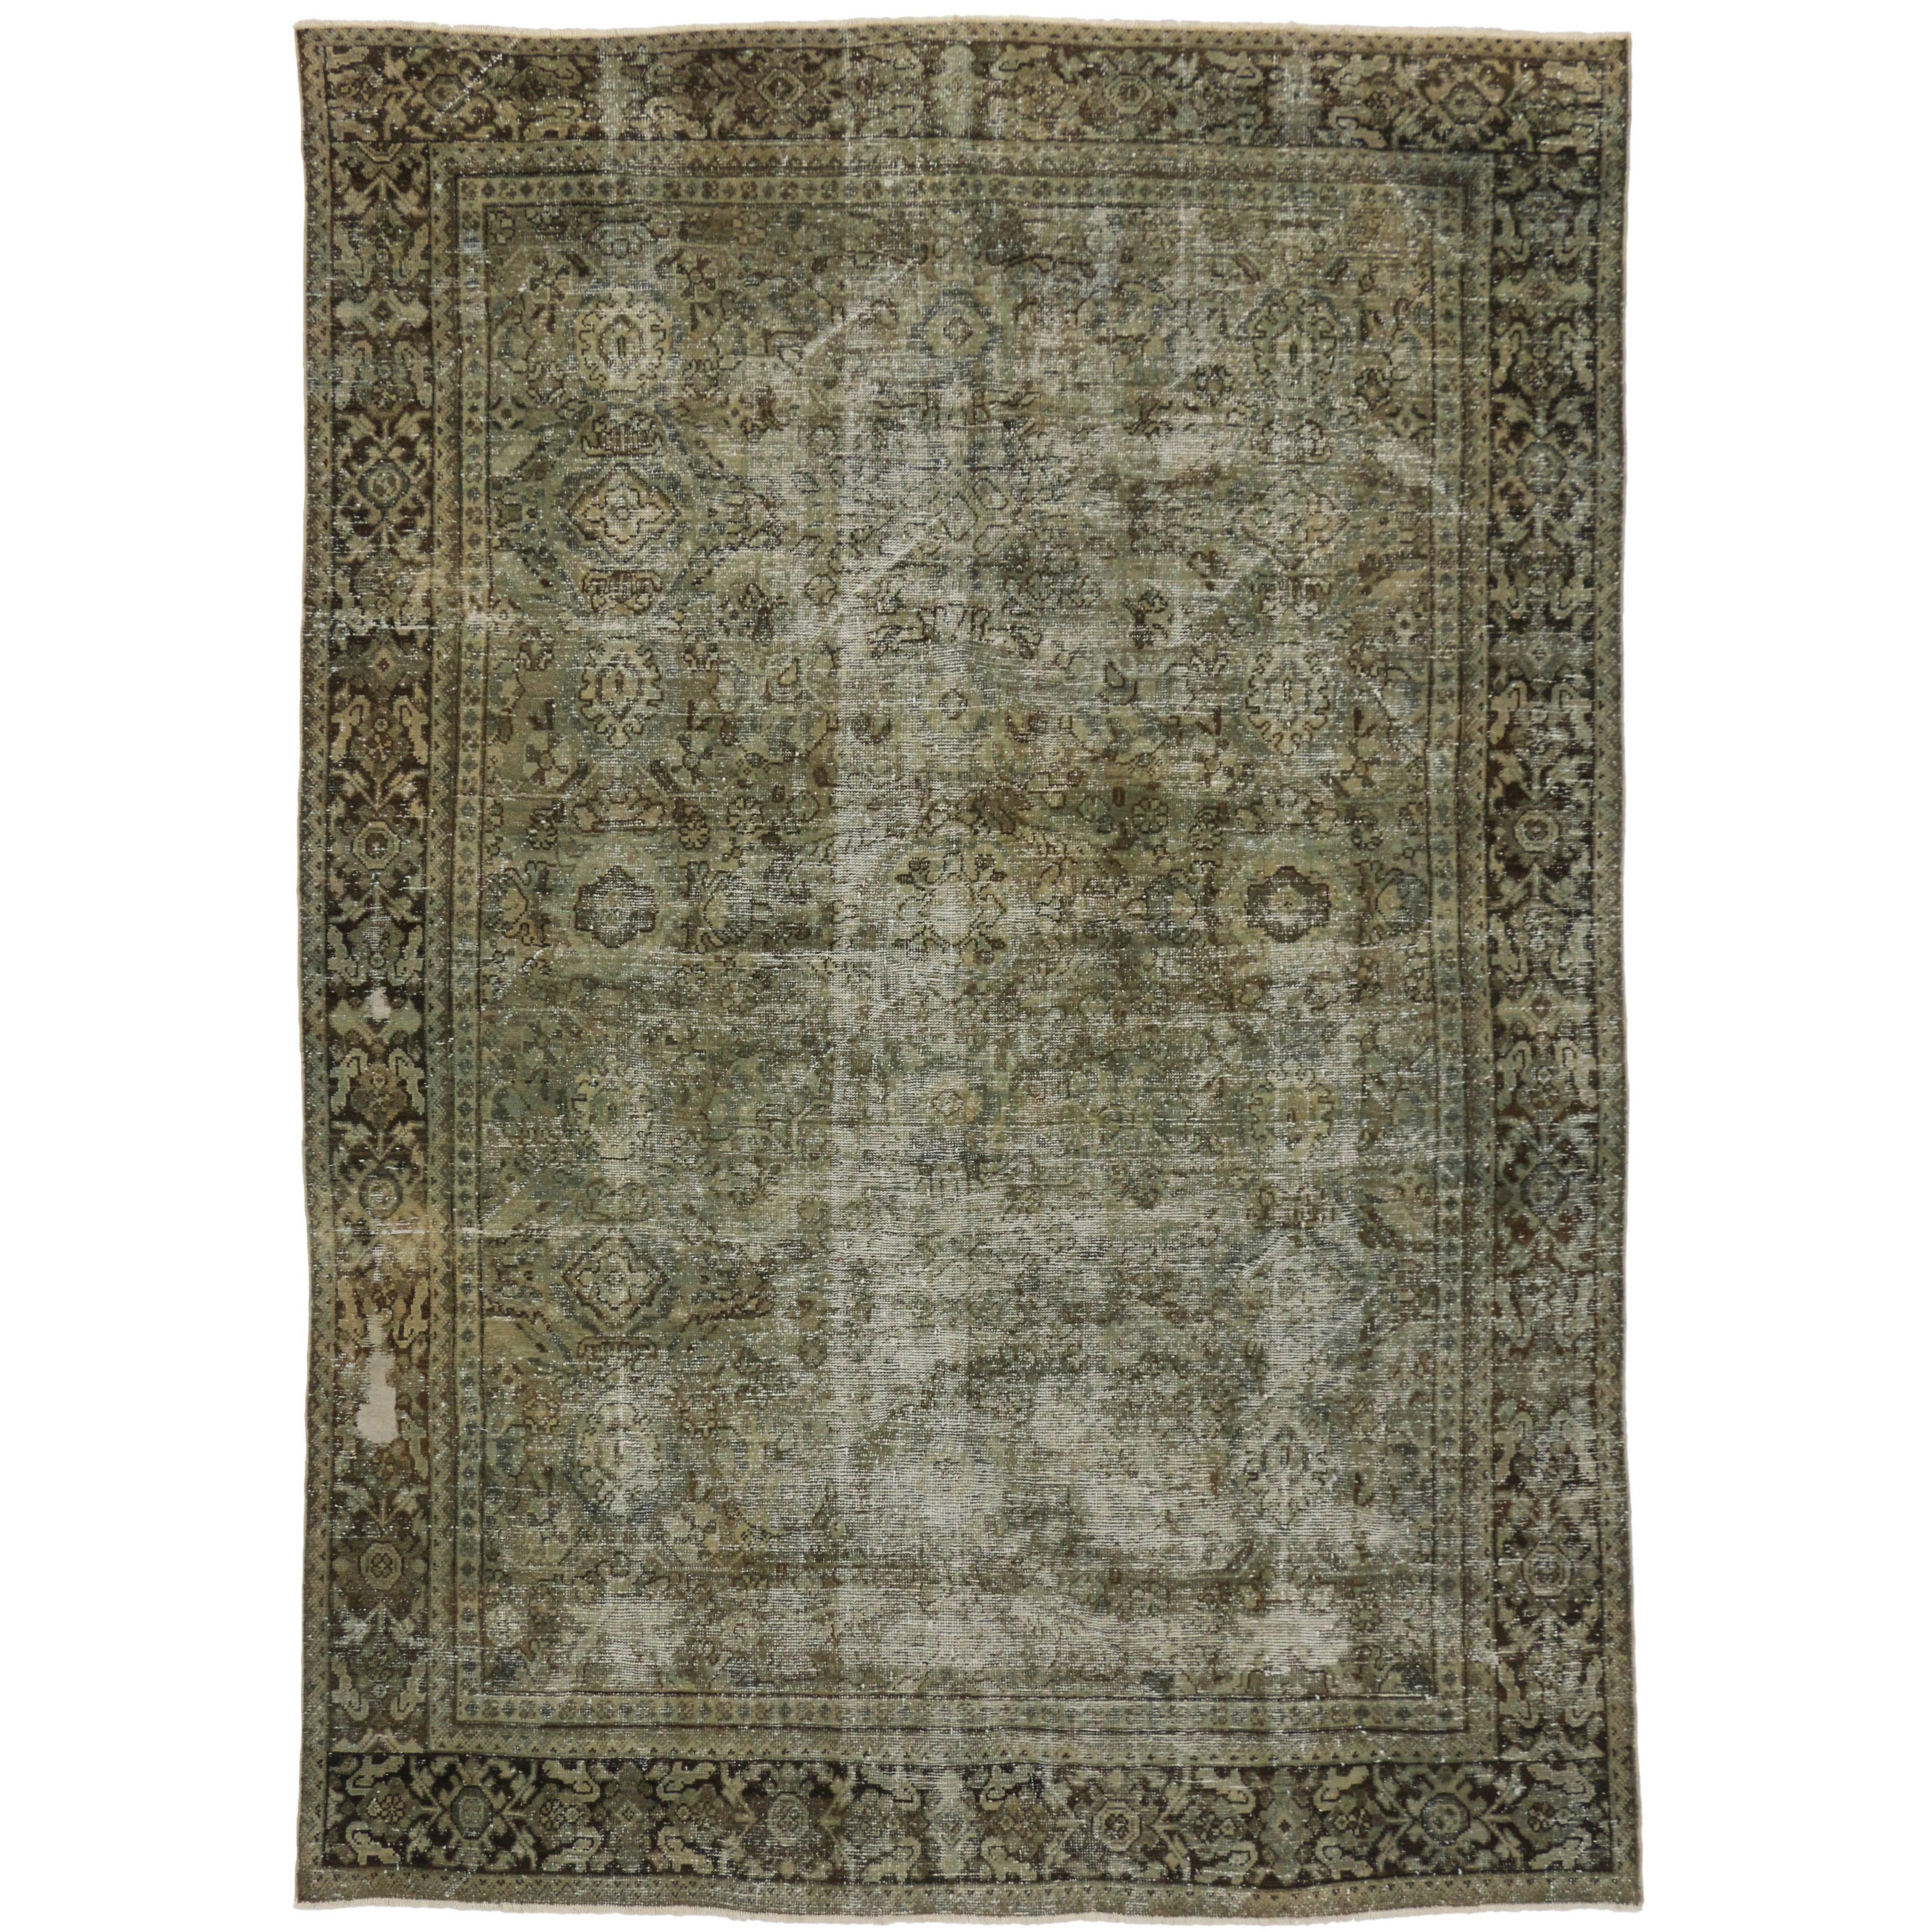 Distressed Antique Persian Mahal Rug with Traditional English Rustic Style